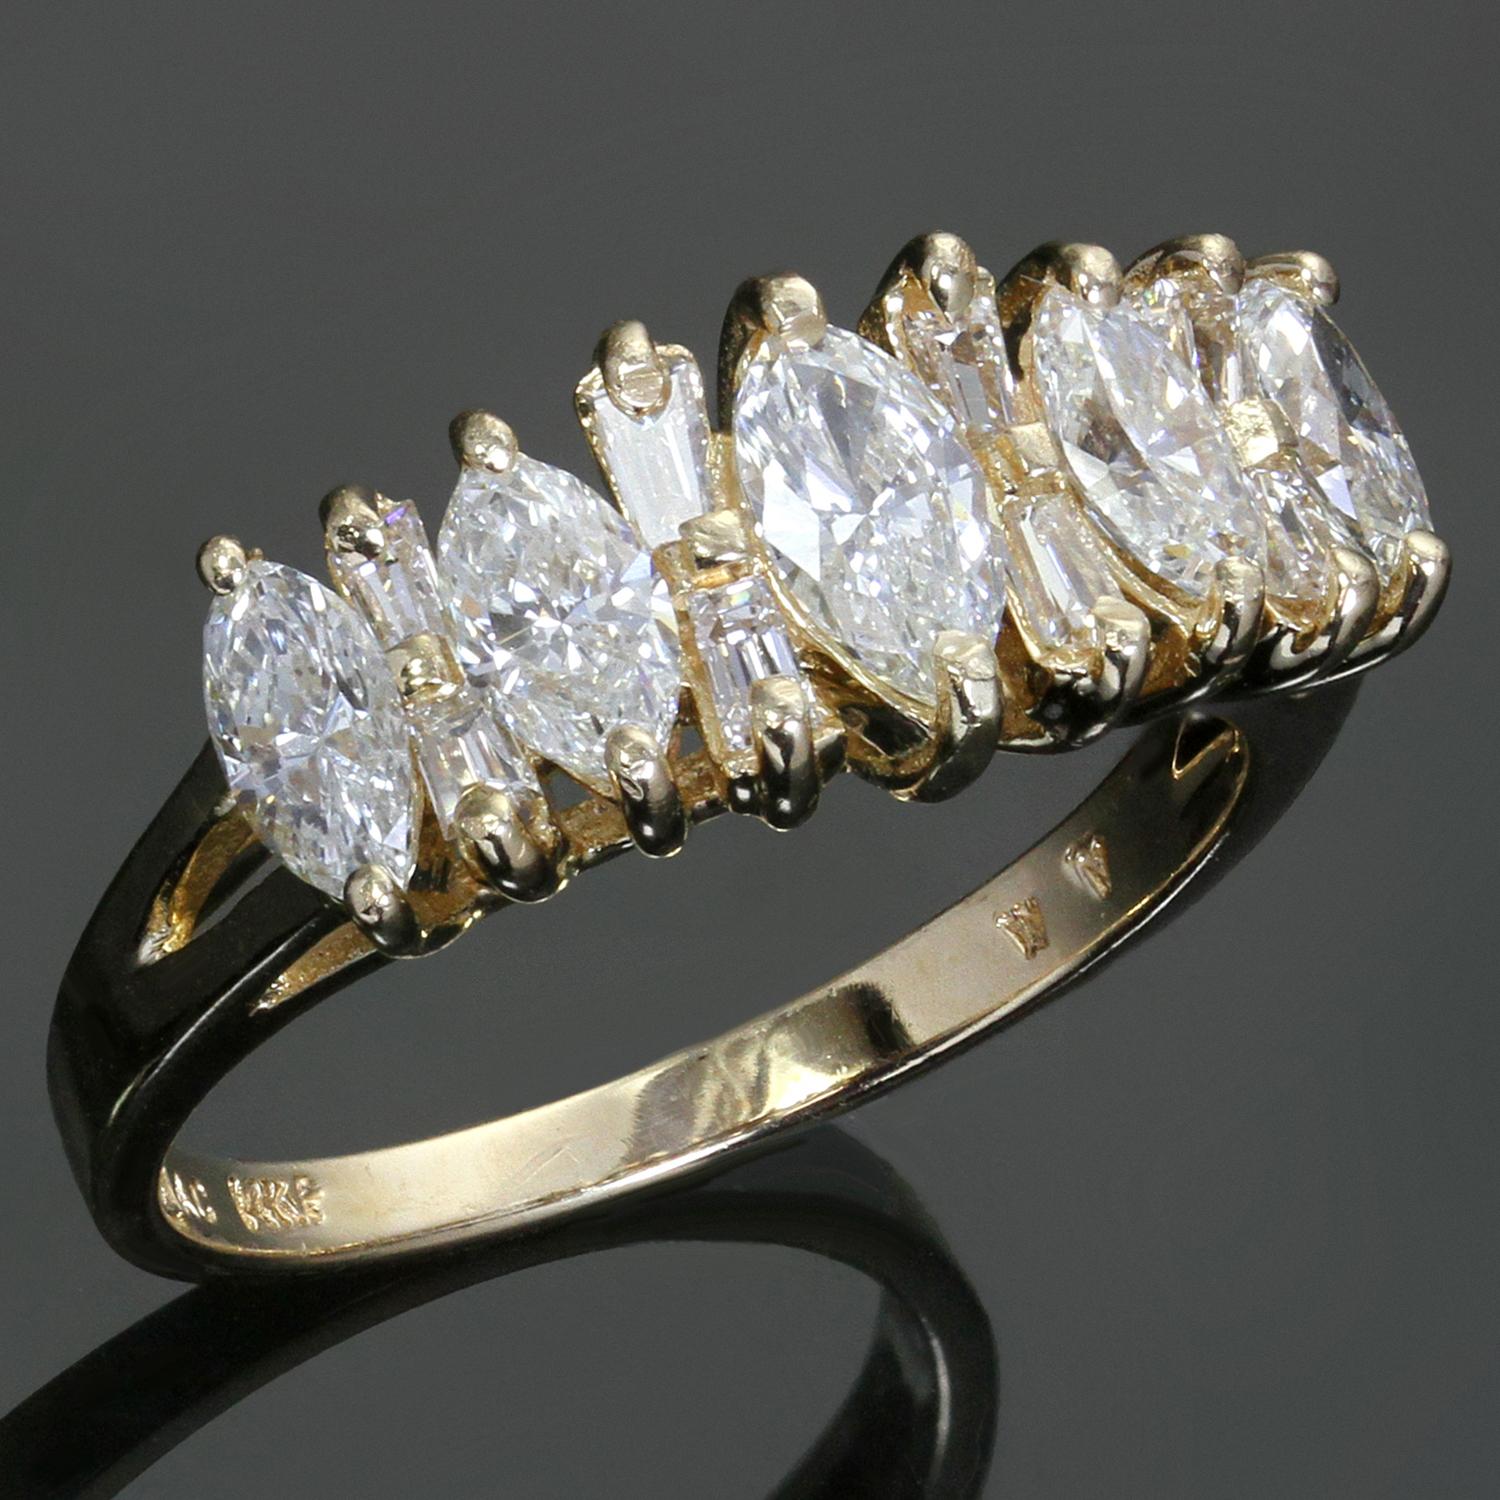 This gorgeous estate women's ring is crafted in 14k yellow gold and set with fancy-cut G-H VS1-VS2 diamonds weighing an estimated 1.58 carats. Made in United States circa 1980s. Measurements: 0.31